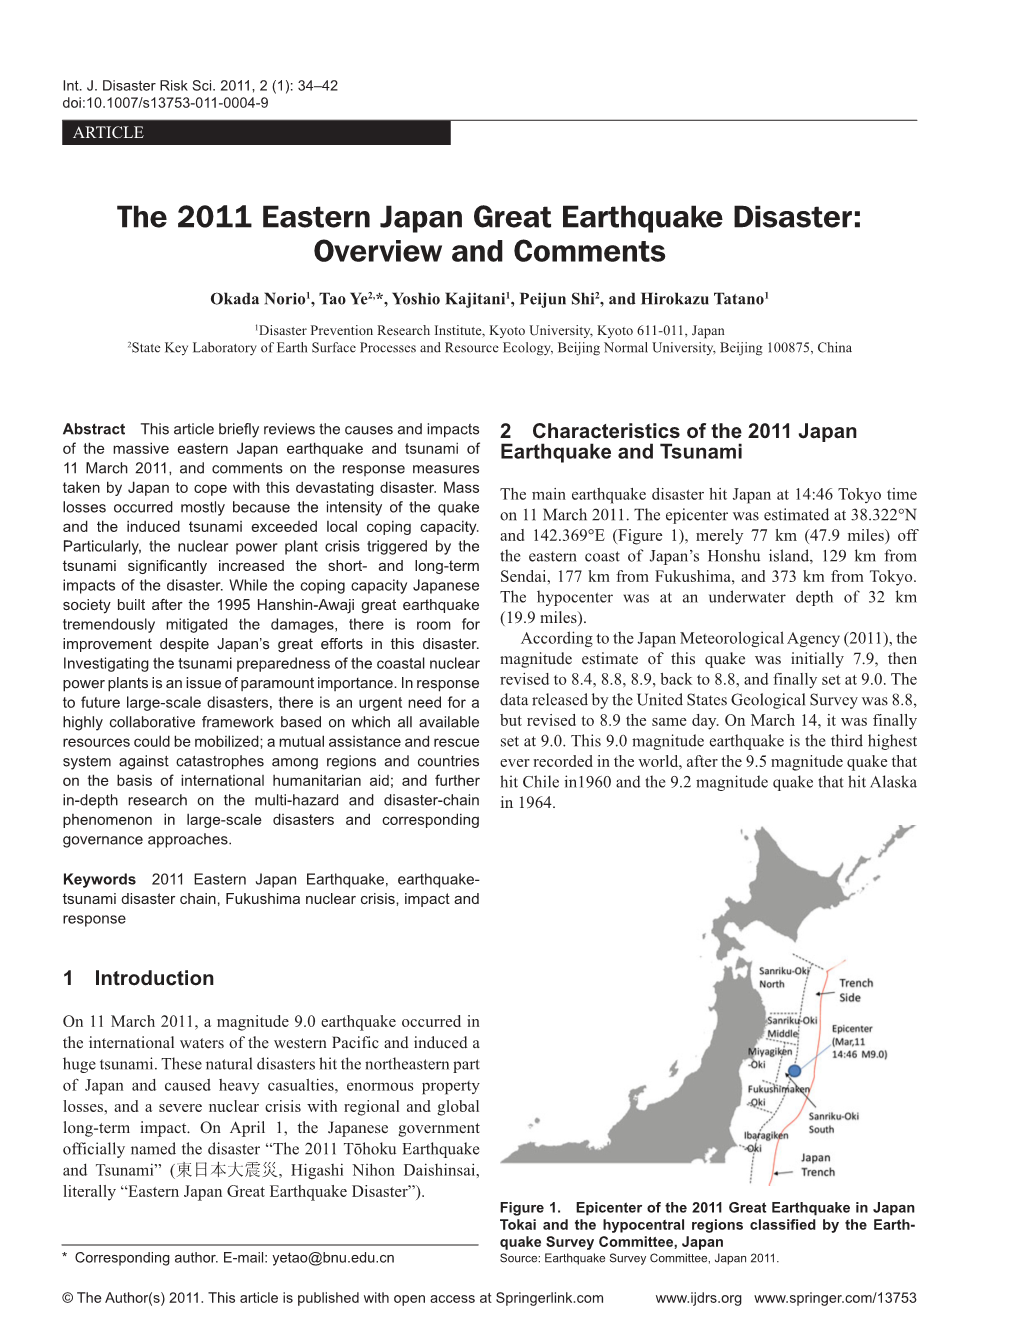 The 2011 Eastern Japan Great Earthquake Disaster: Overview and Comments